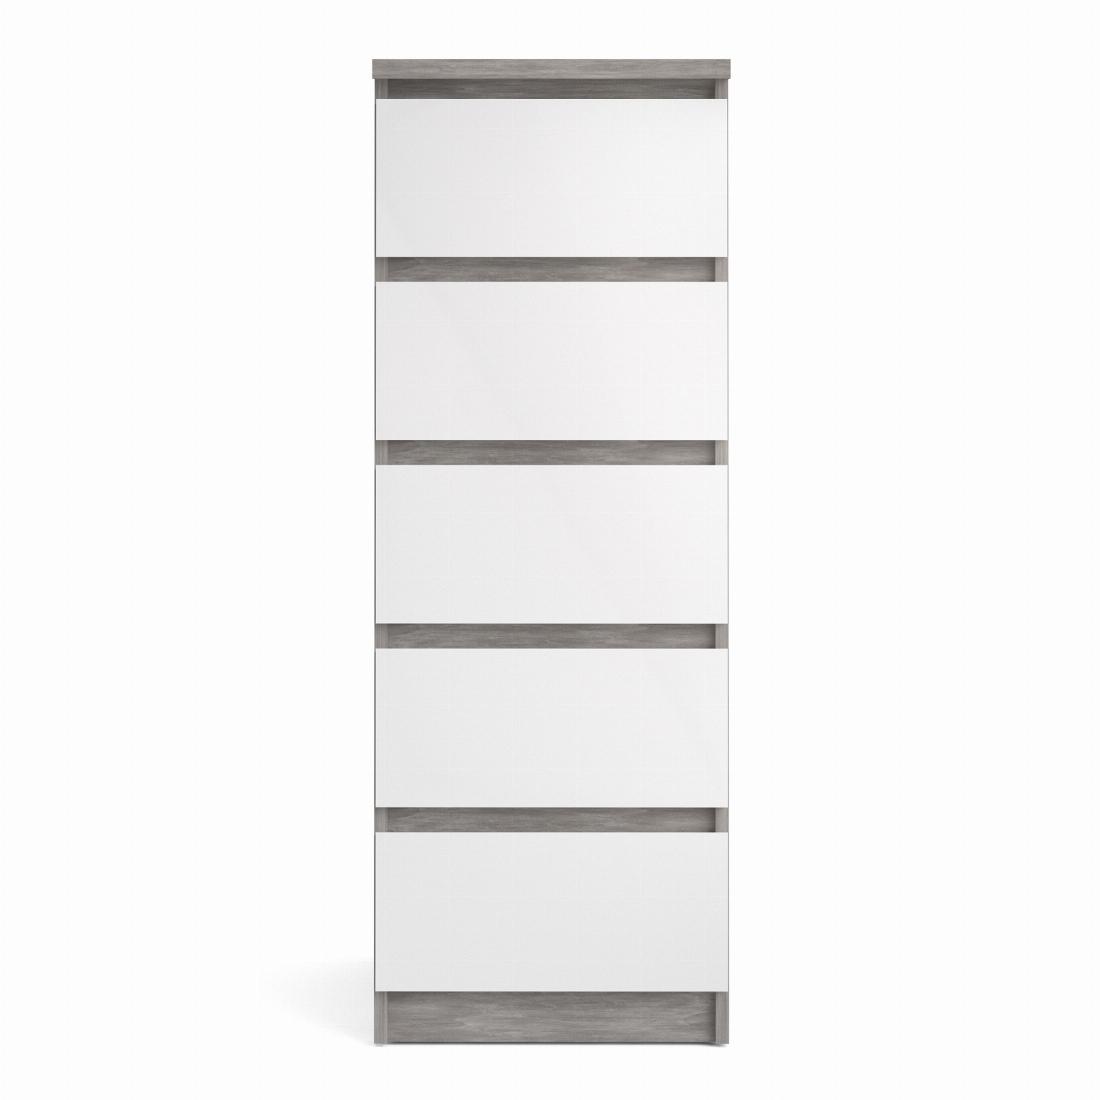 Naia Narrow Chest of 5 Drawers in Concrete and White High Gloss